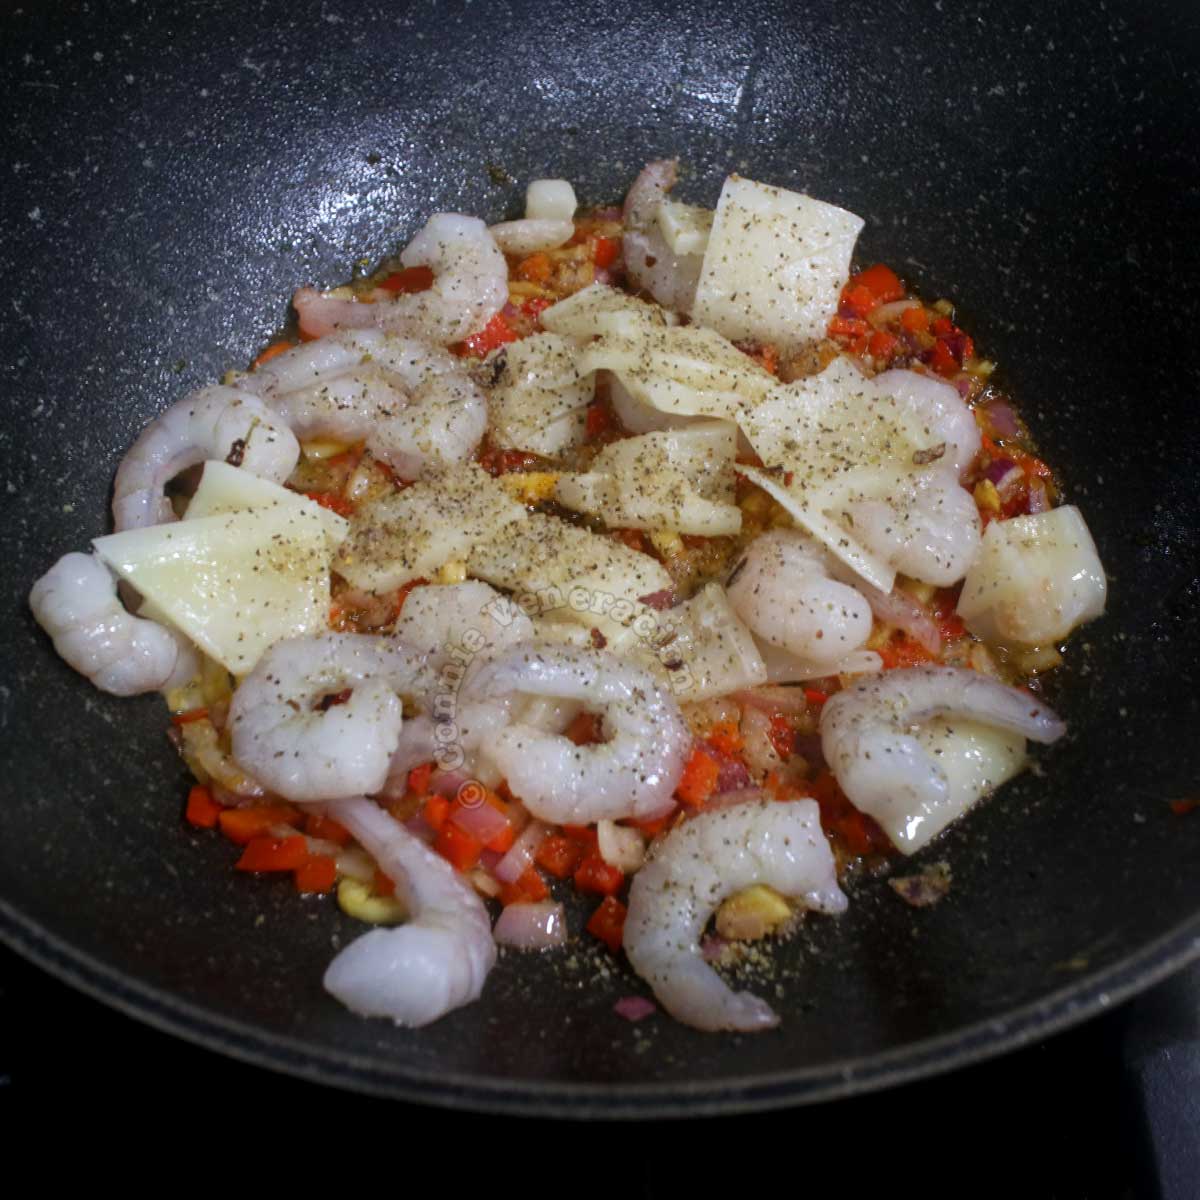 Stir frying shrimps and squid